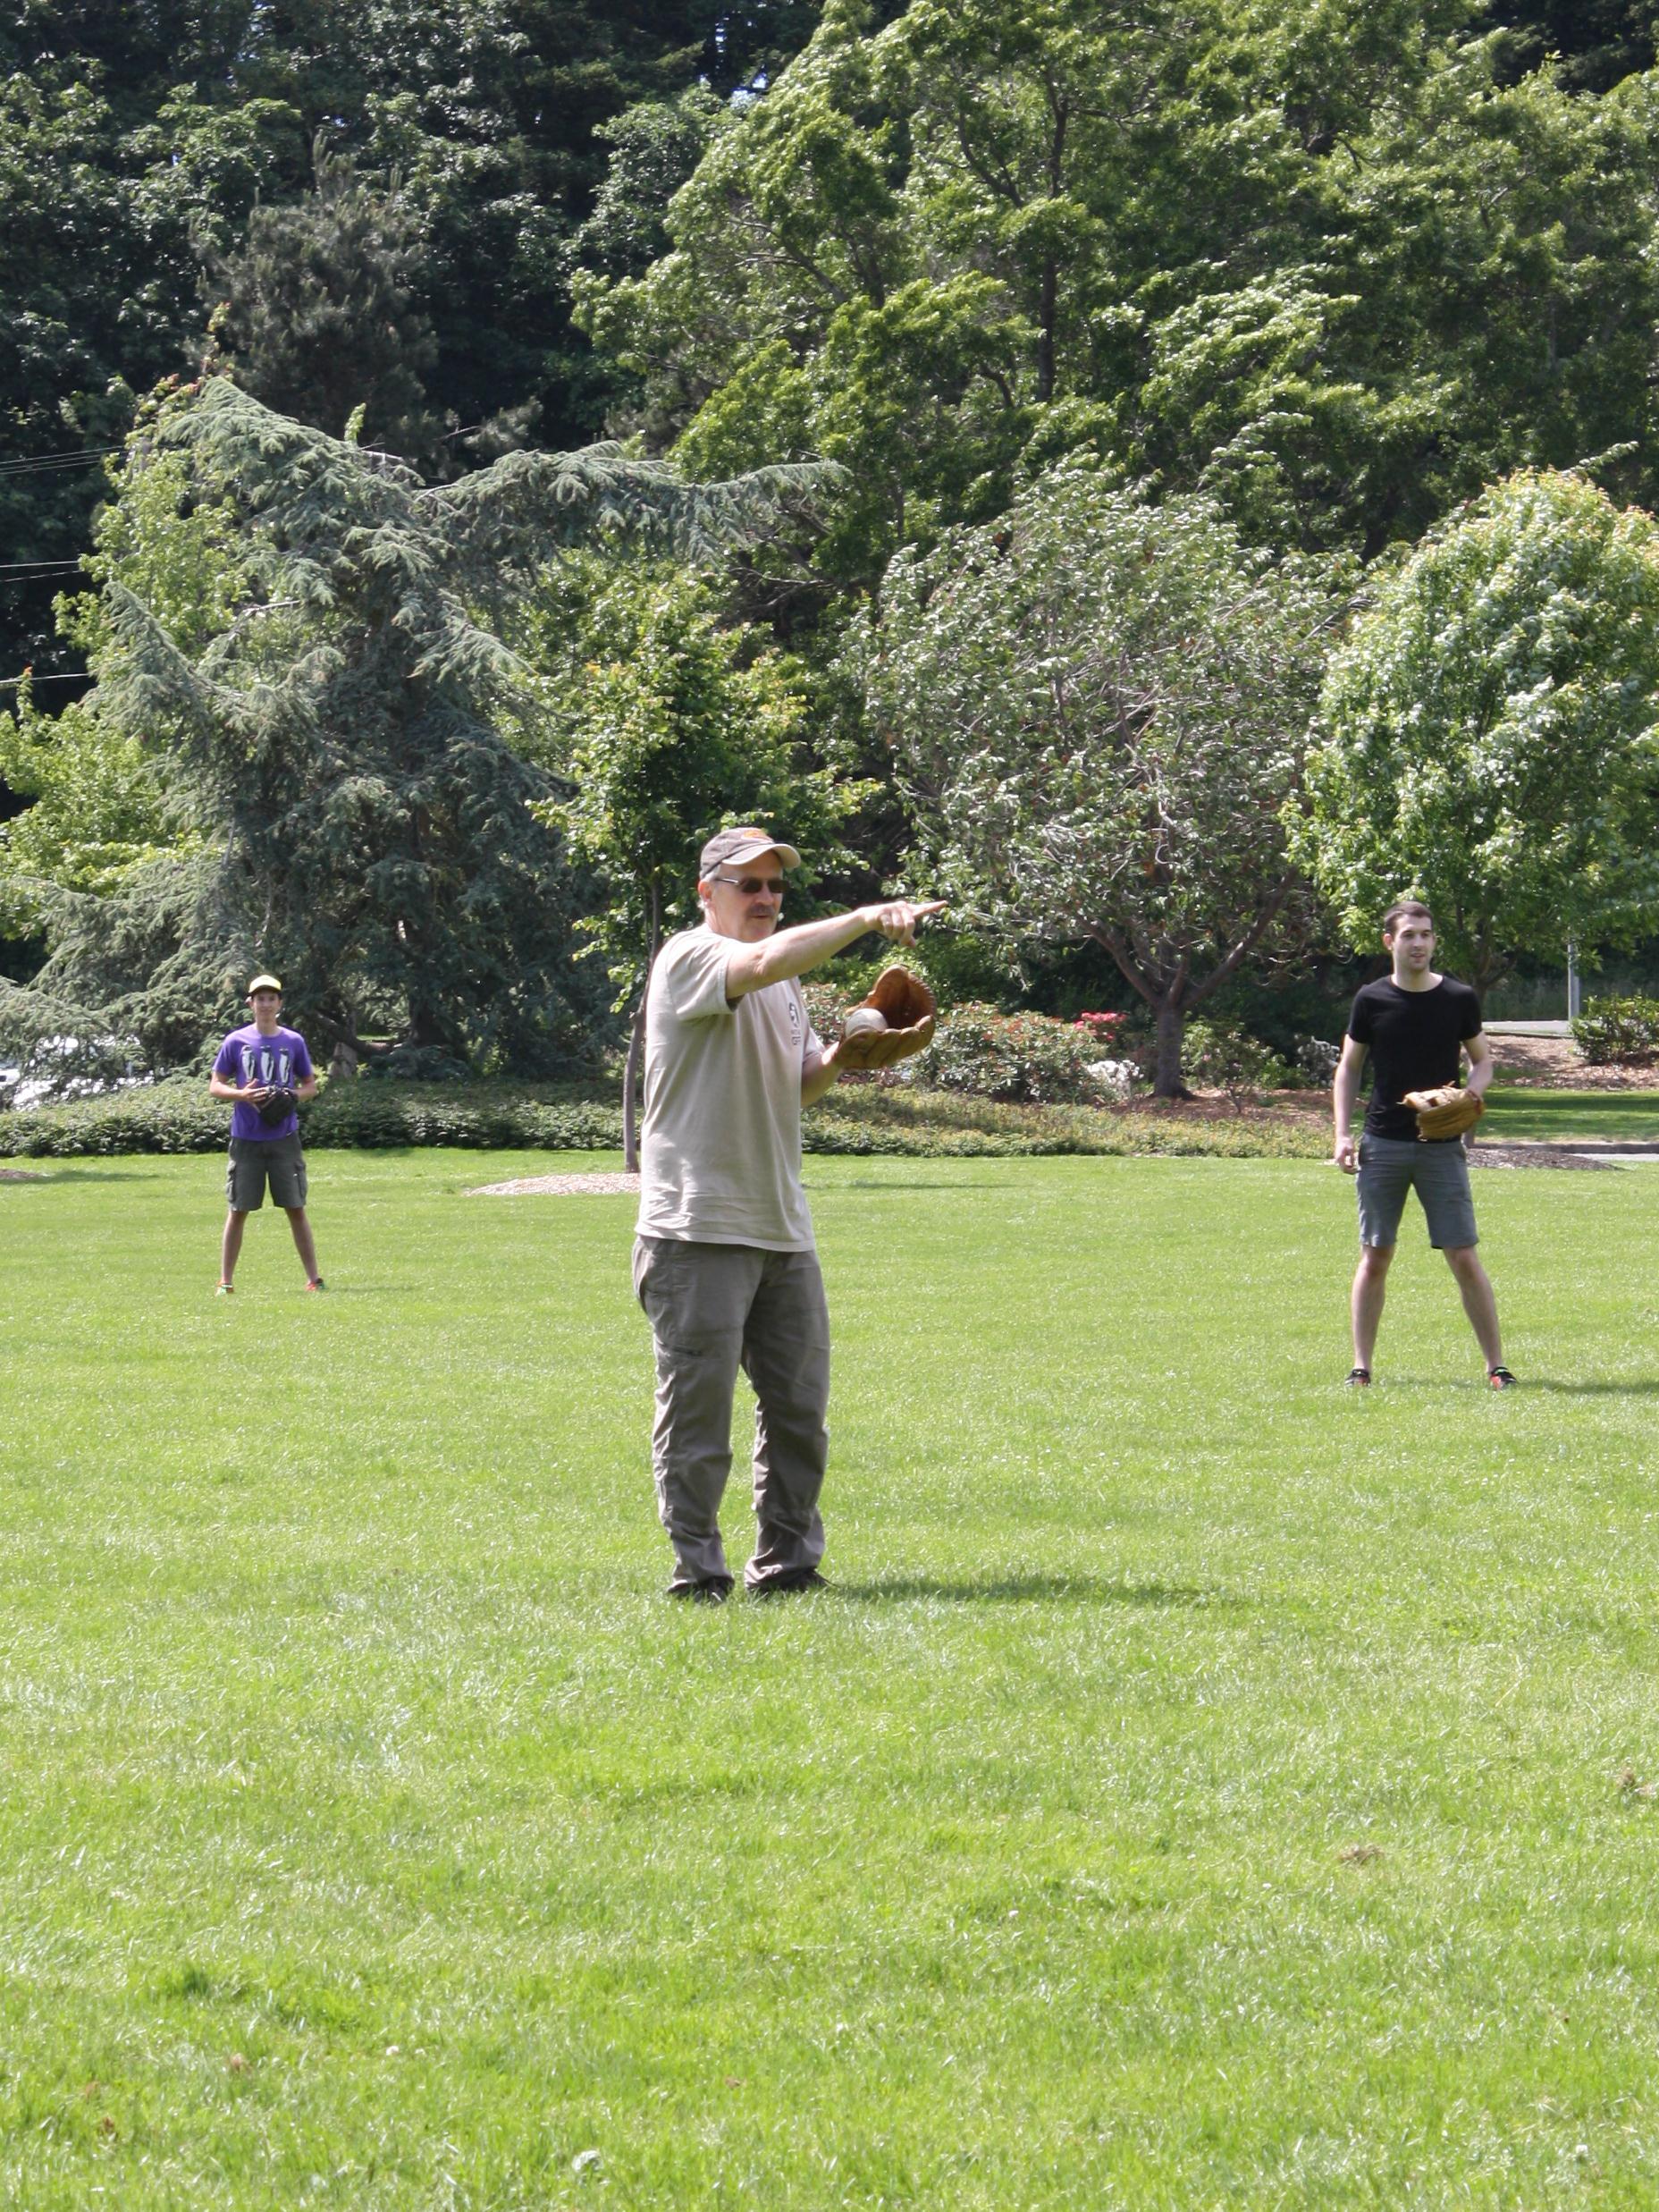 Professor John Harris takes the role of pitcher at a baseball game in the park.